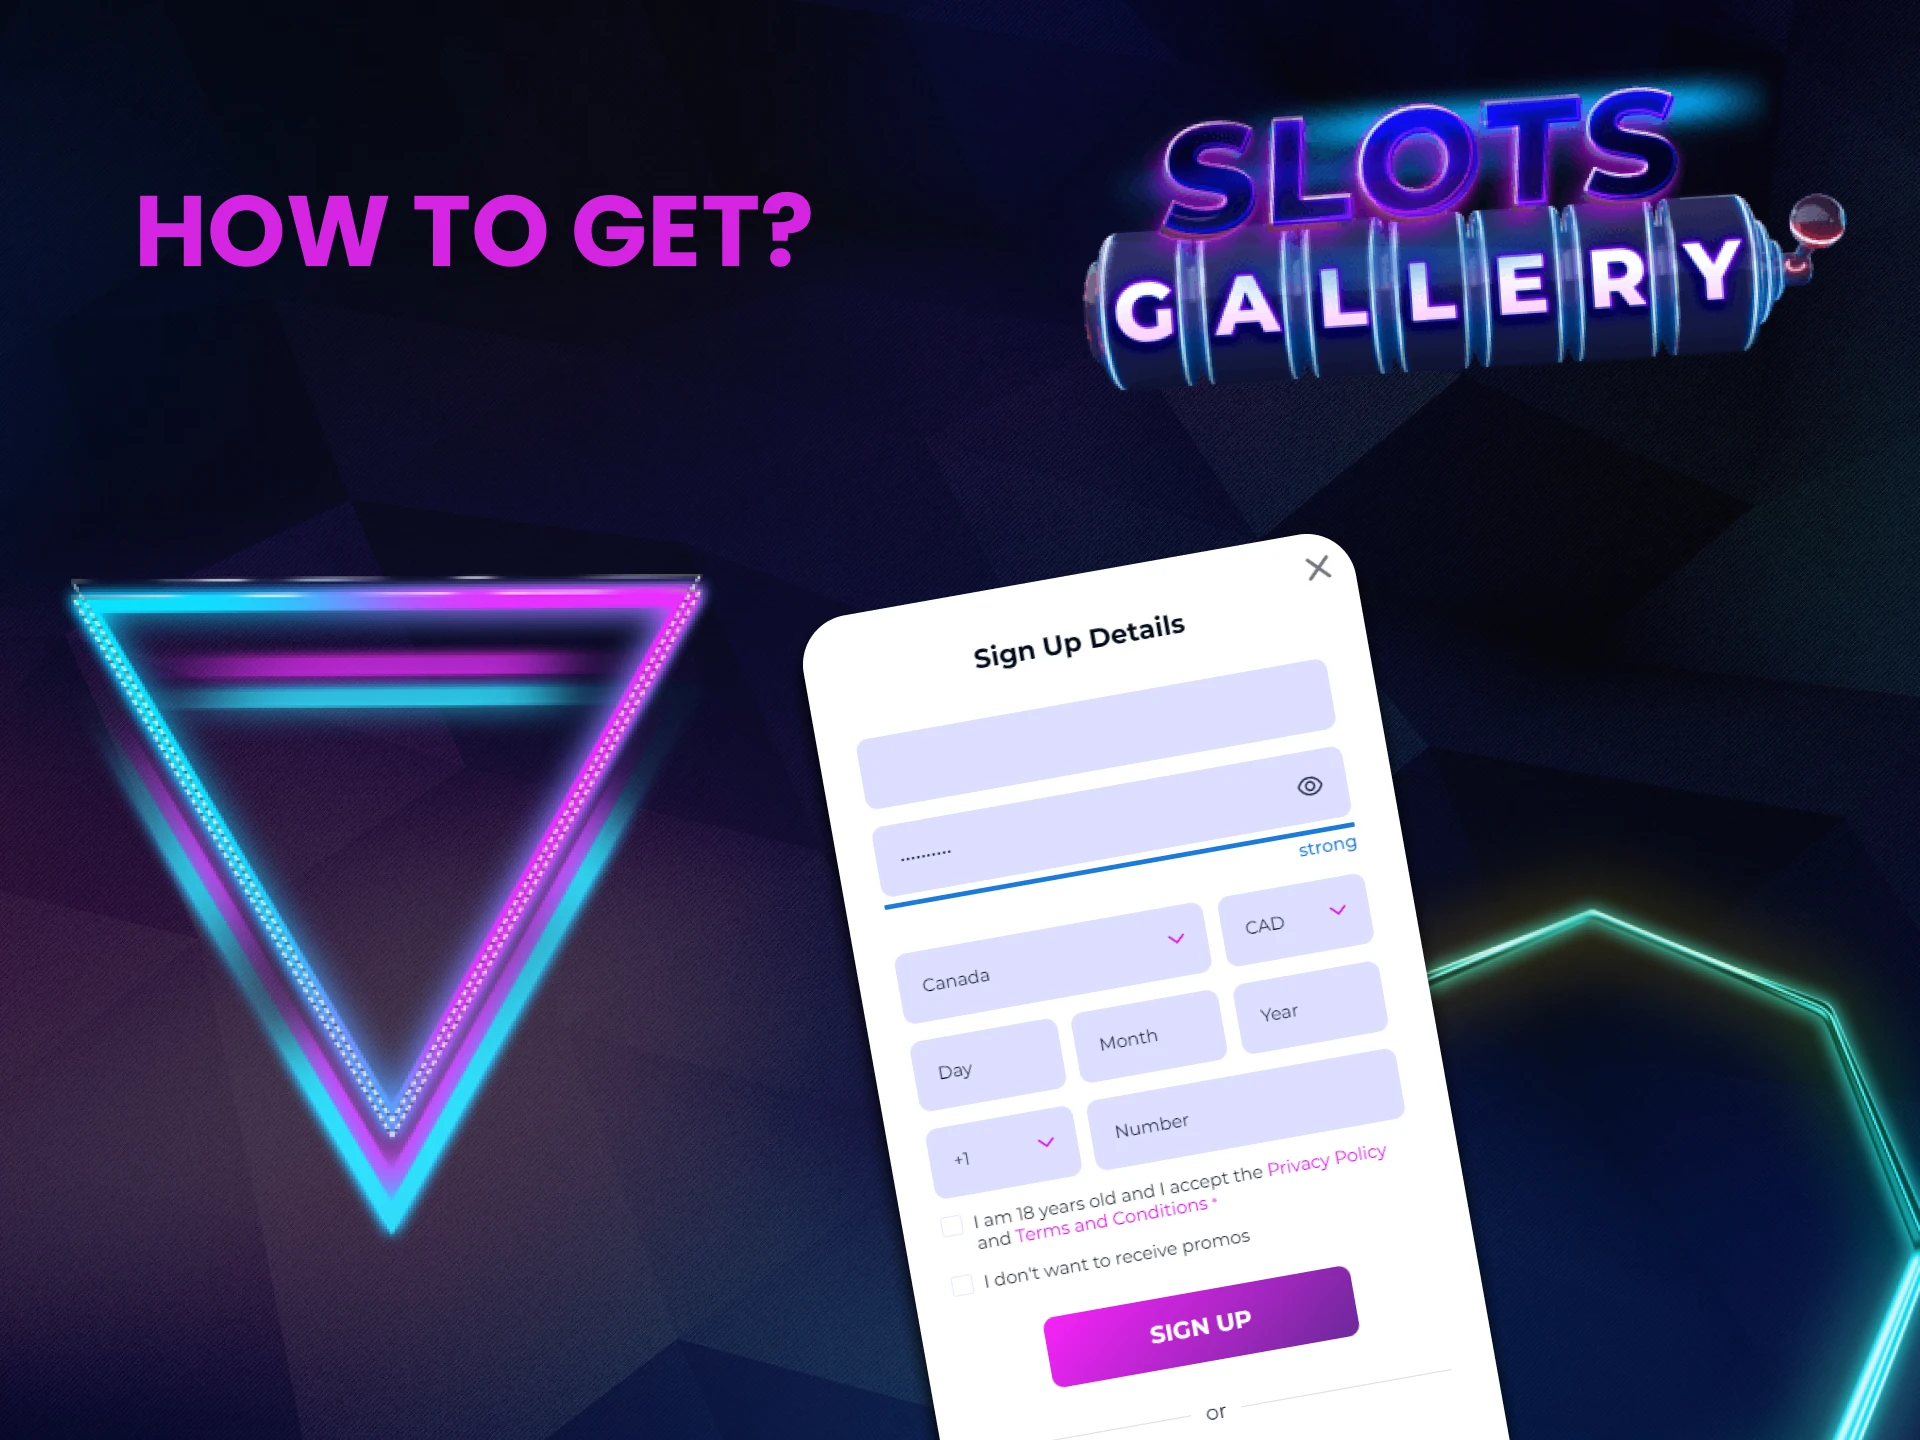 We will tell you how to get a bonus without making a deposit at Slots Gallery.